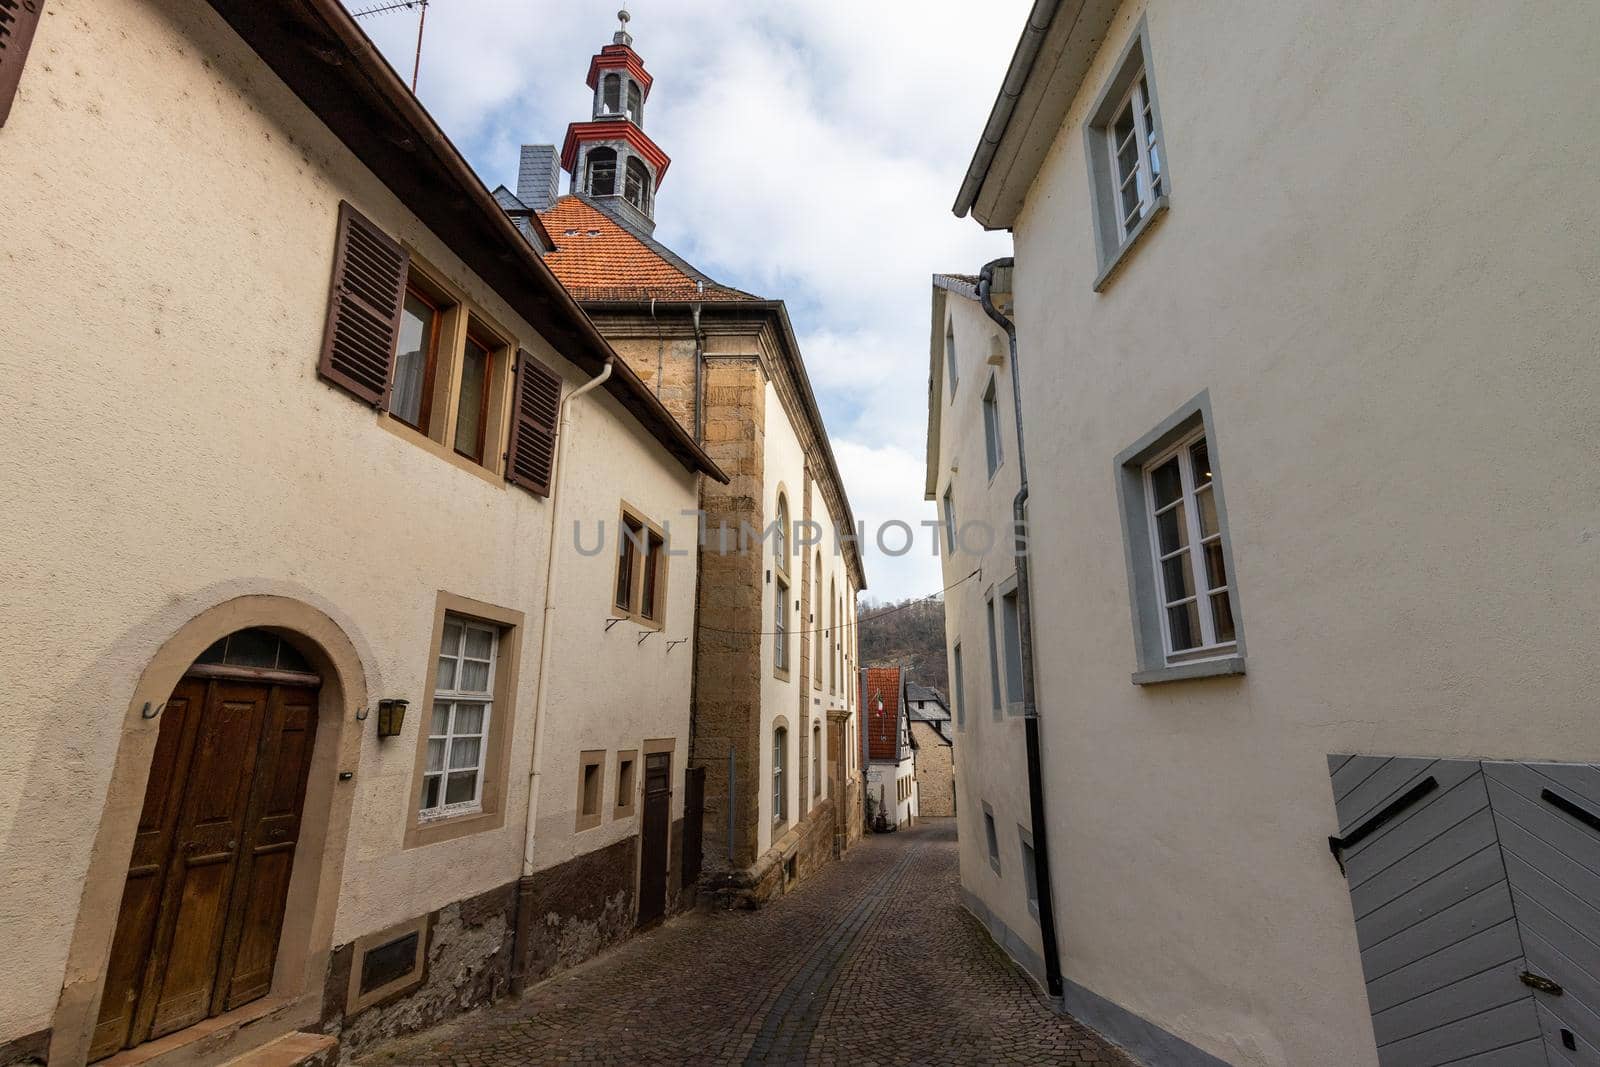 Cobbled road with historic houses in Meisenheim, Rhineland-Palatinate, Germany 